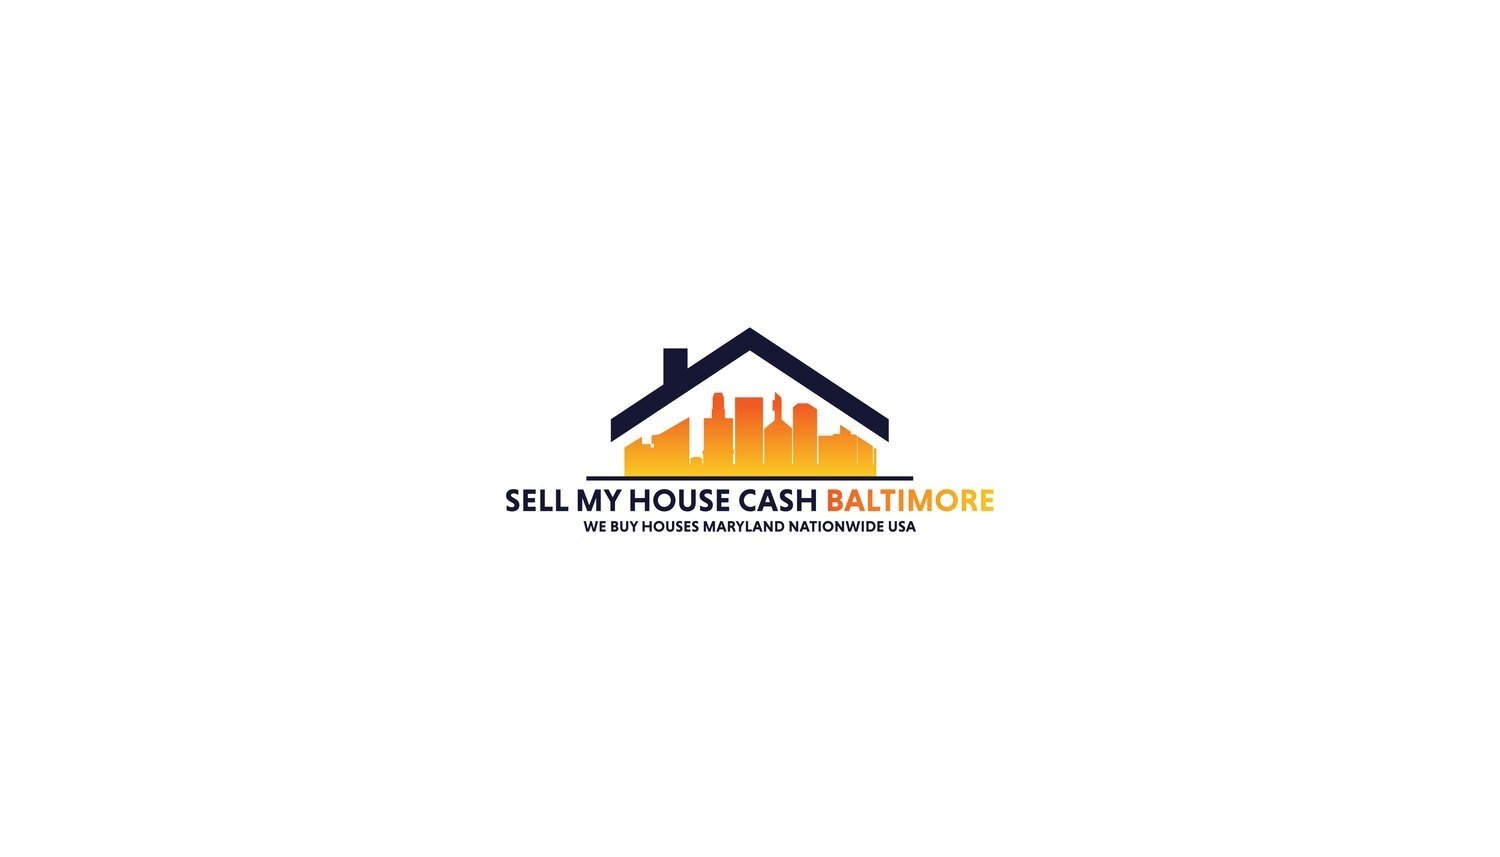 Sell My House Fast Baltimore cover